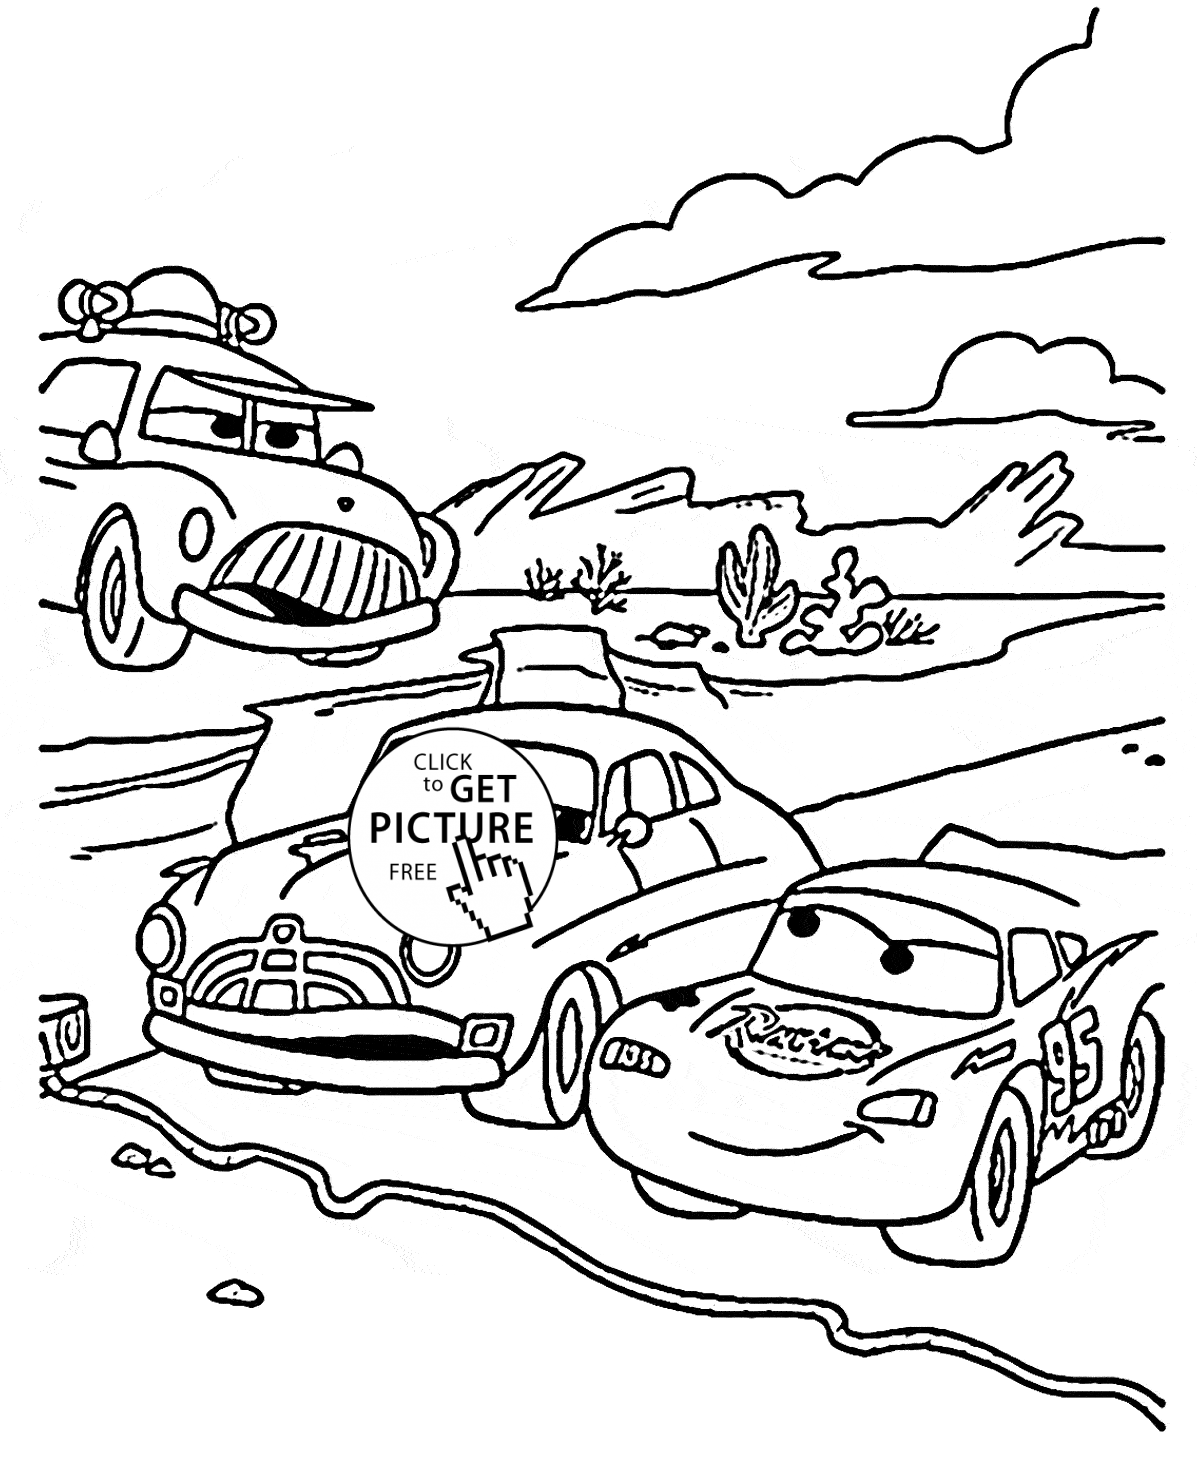 Track Race Cars coloring page for kids, disney coloring pages